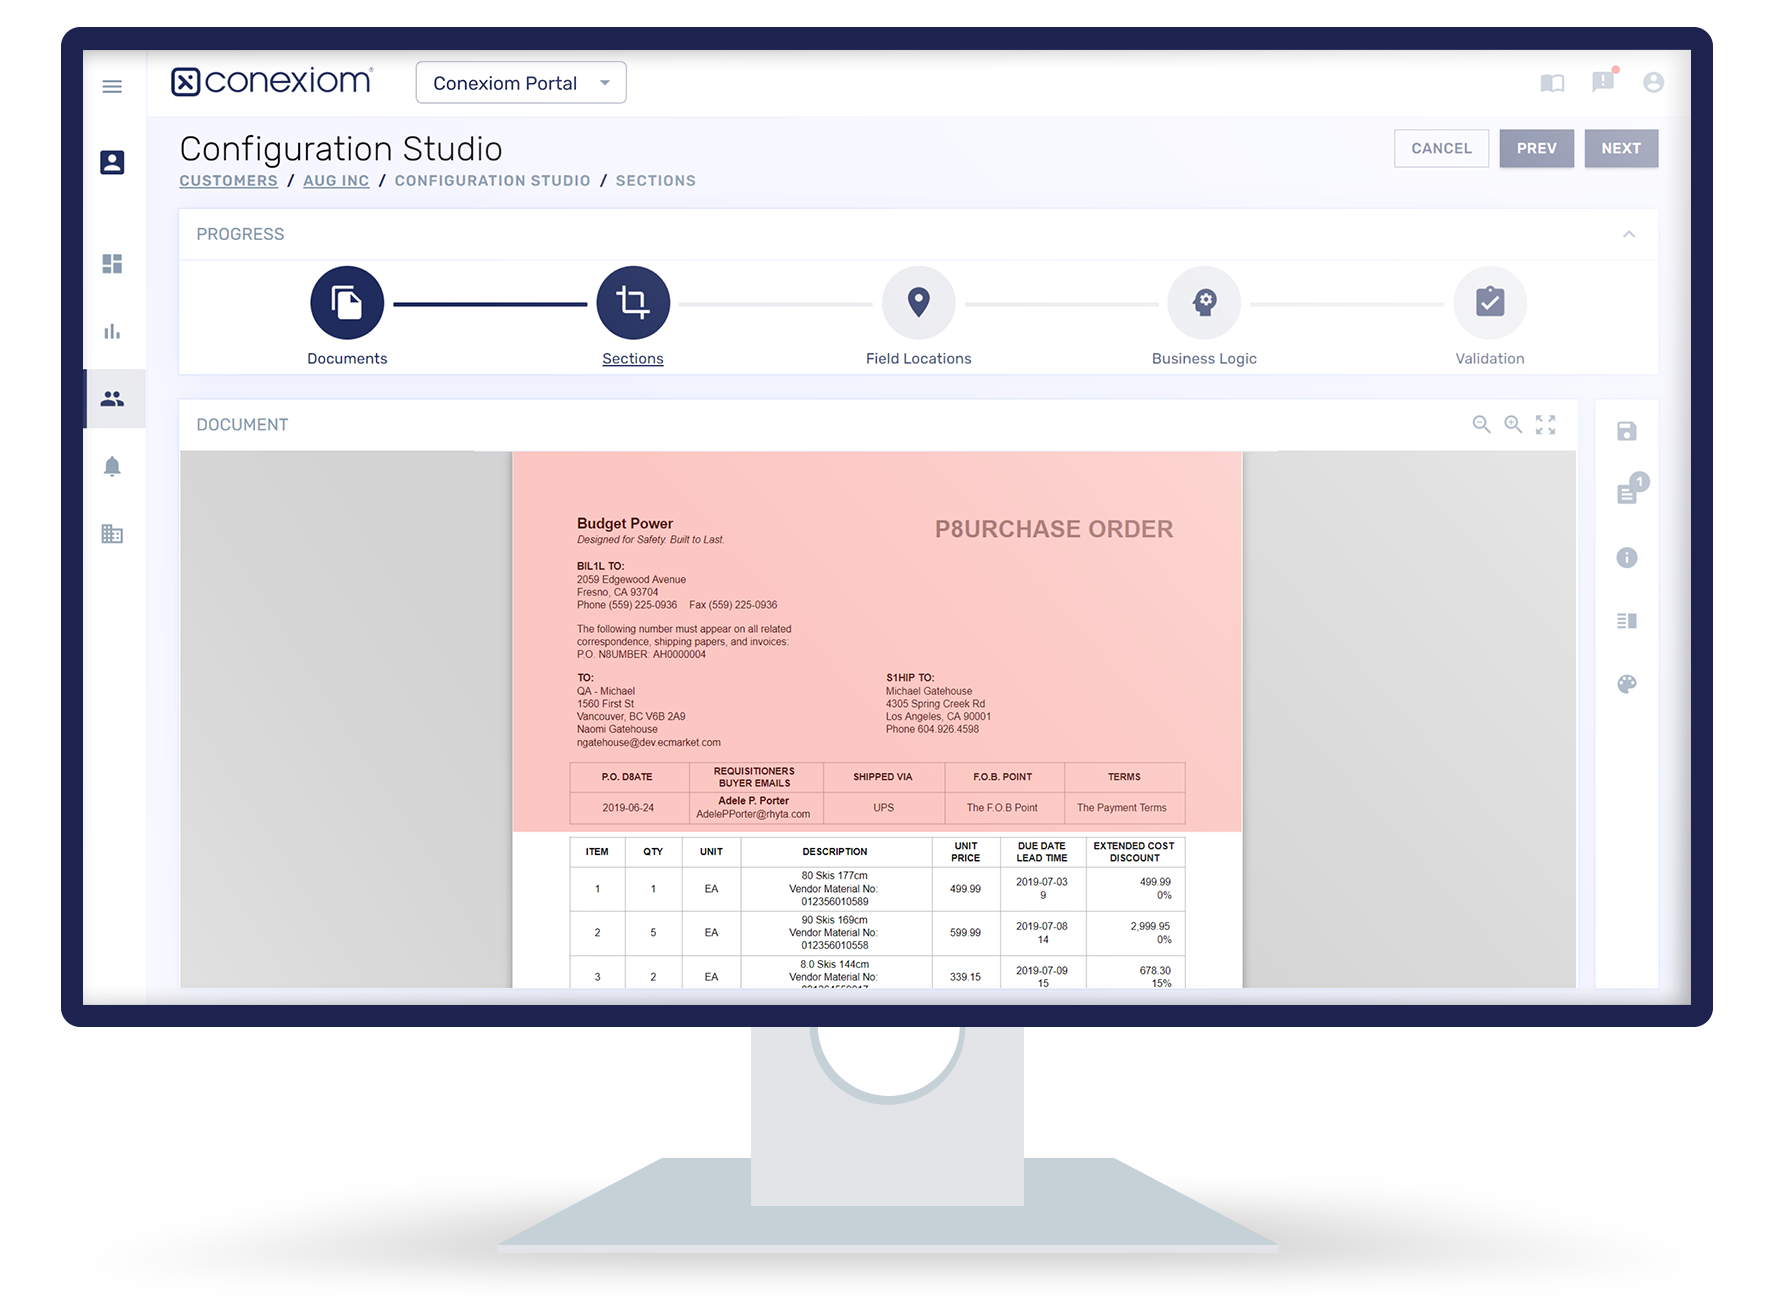 Configuration Studio - Manage configurations for the customers and vendors on The Conexiom Platform in the Configuration Studio.